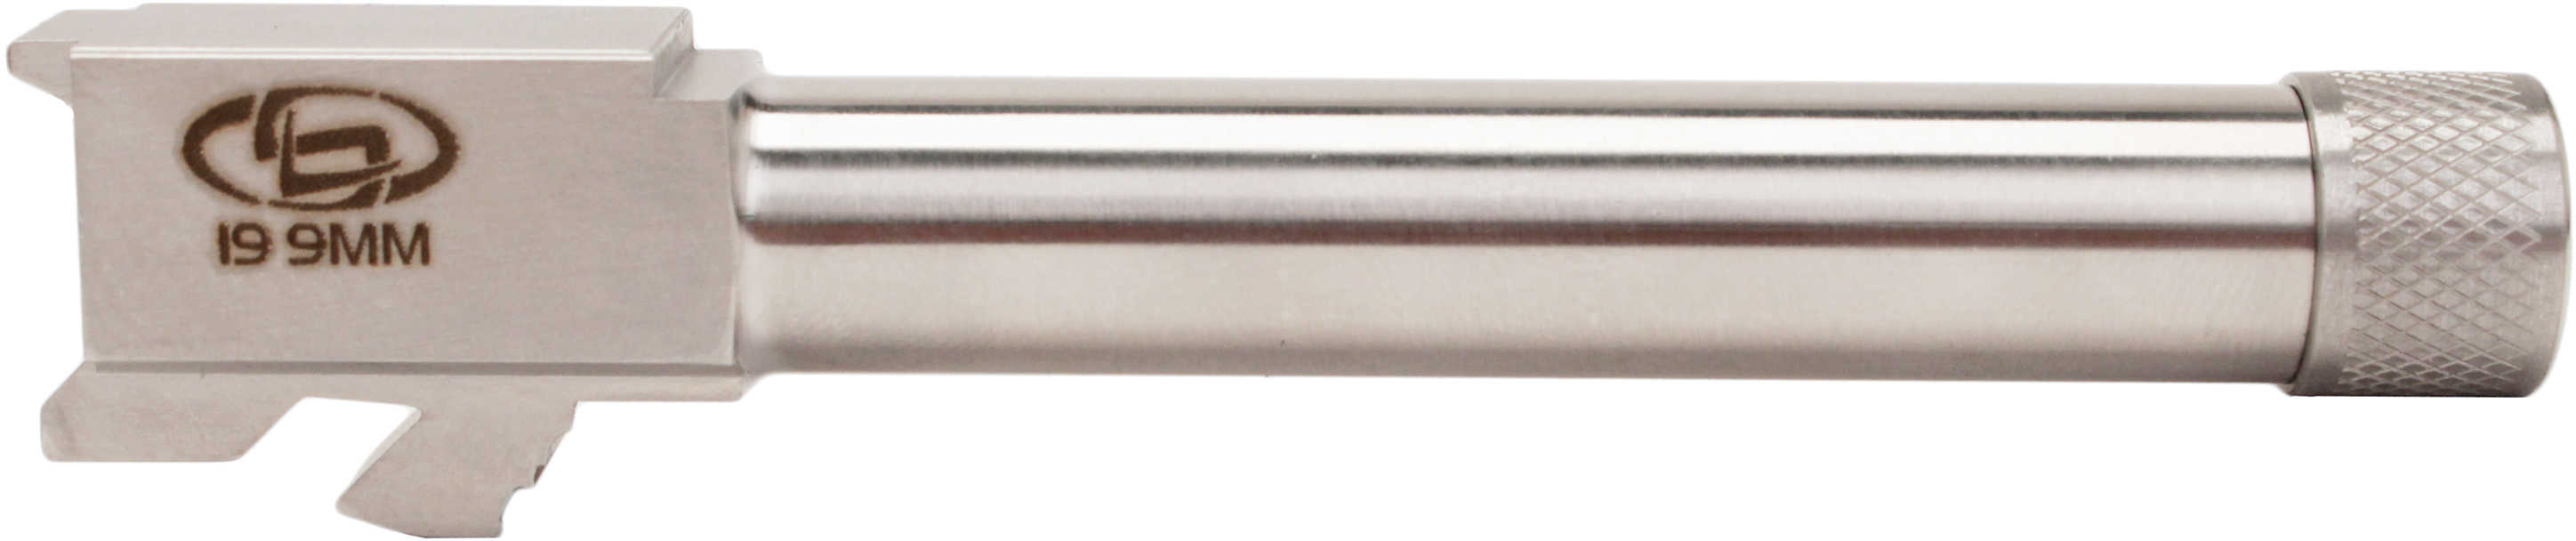 StormLake Barrels Lake 9MM 4.72" Fits Glock 19 Stainless Finish 1/2-28 Thread With Protector 340 34009